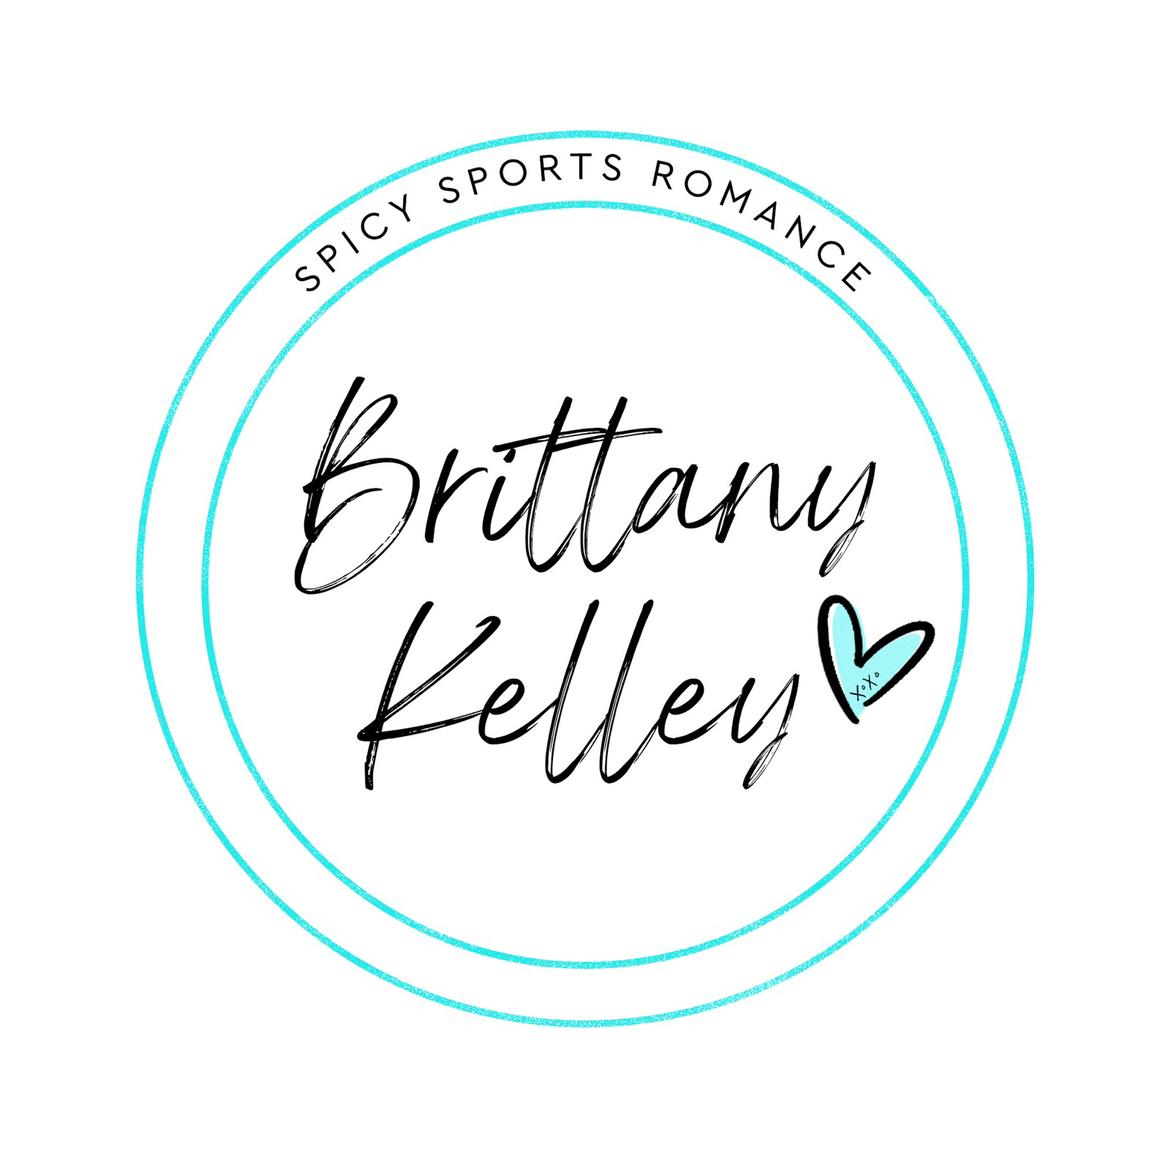 Brittany Kelley's images